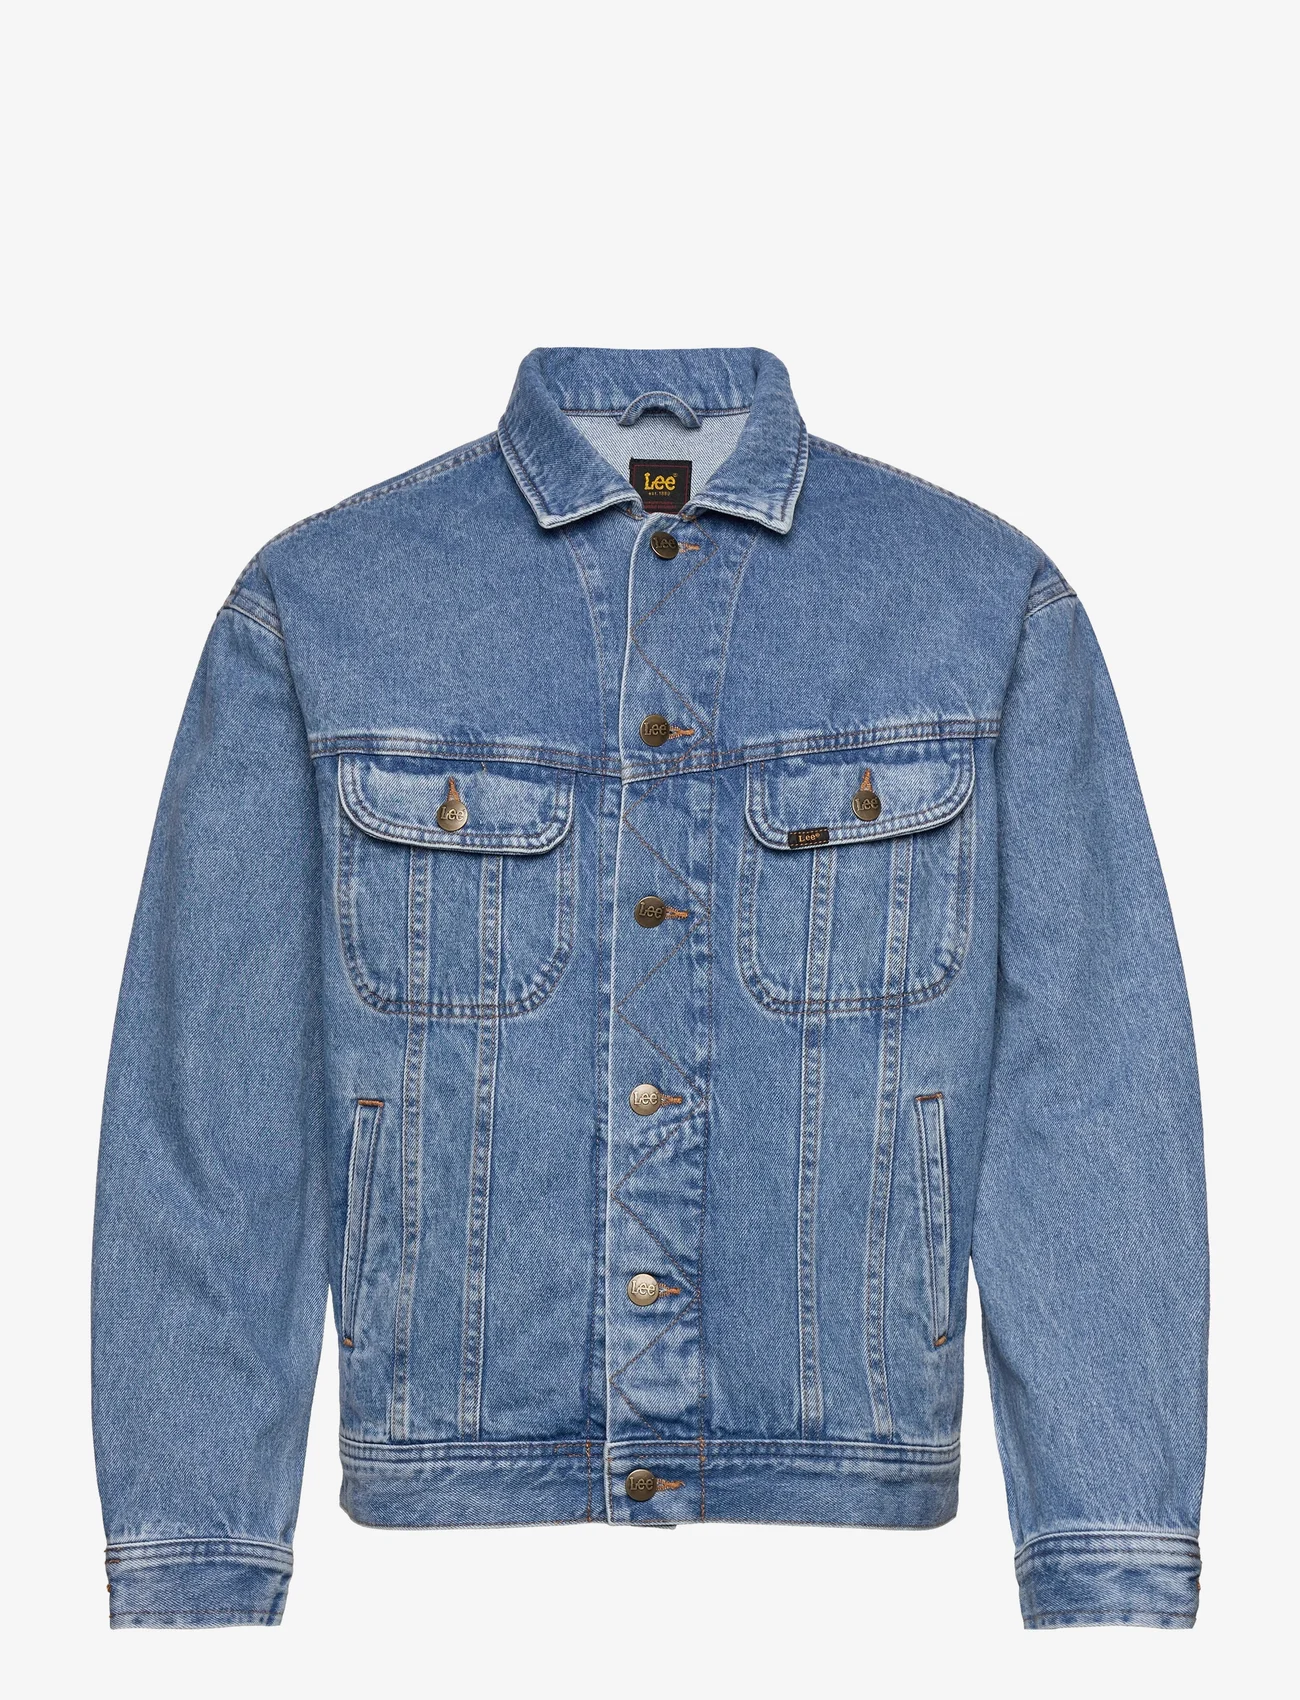 Lee Jeans Relaxed Rider Jacket  €. Buy Denim Jackets from Lee Jeans  online at . Fast delivery and easy returns